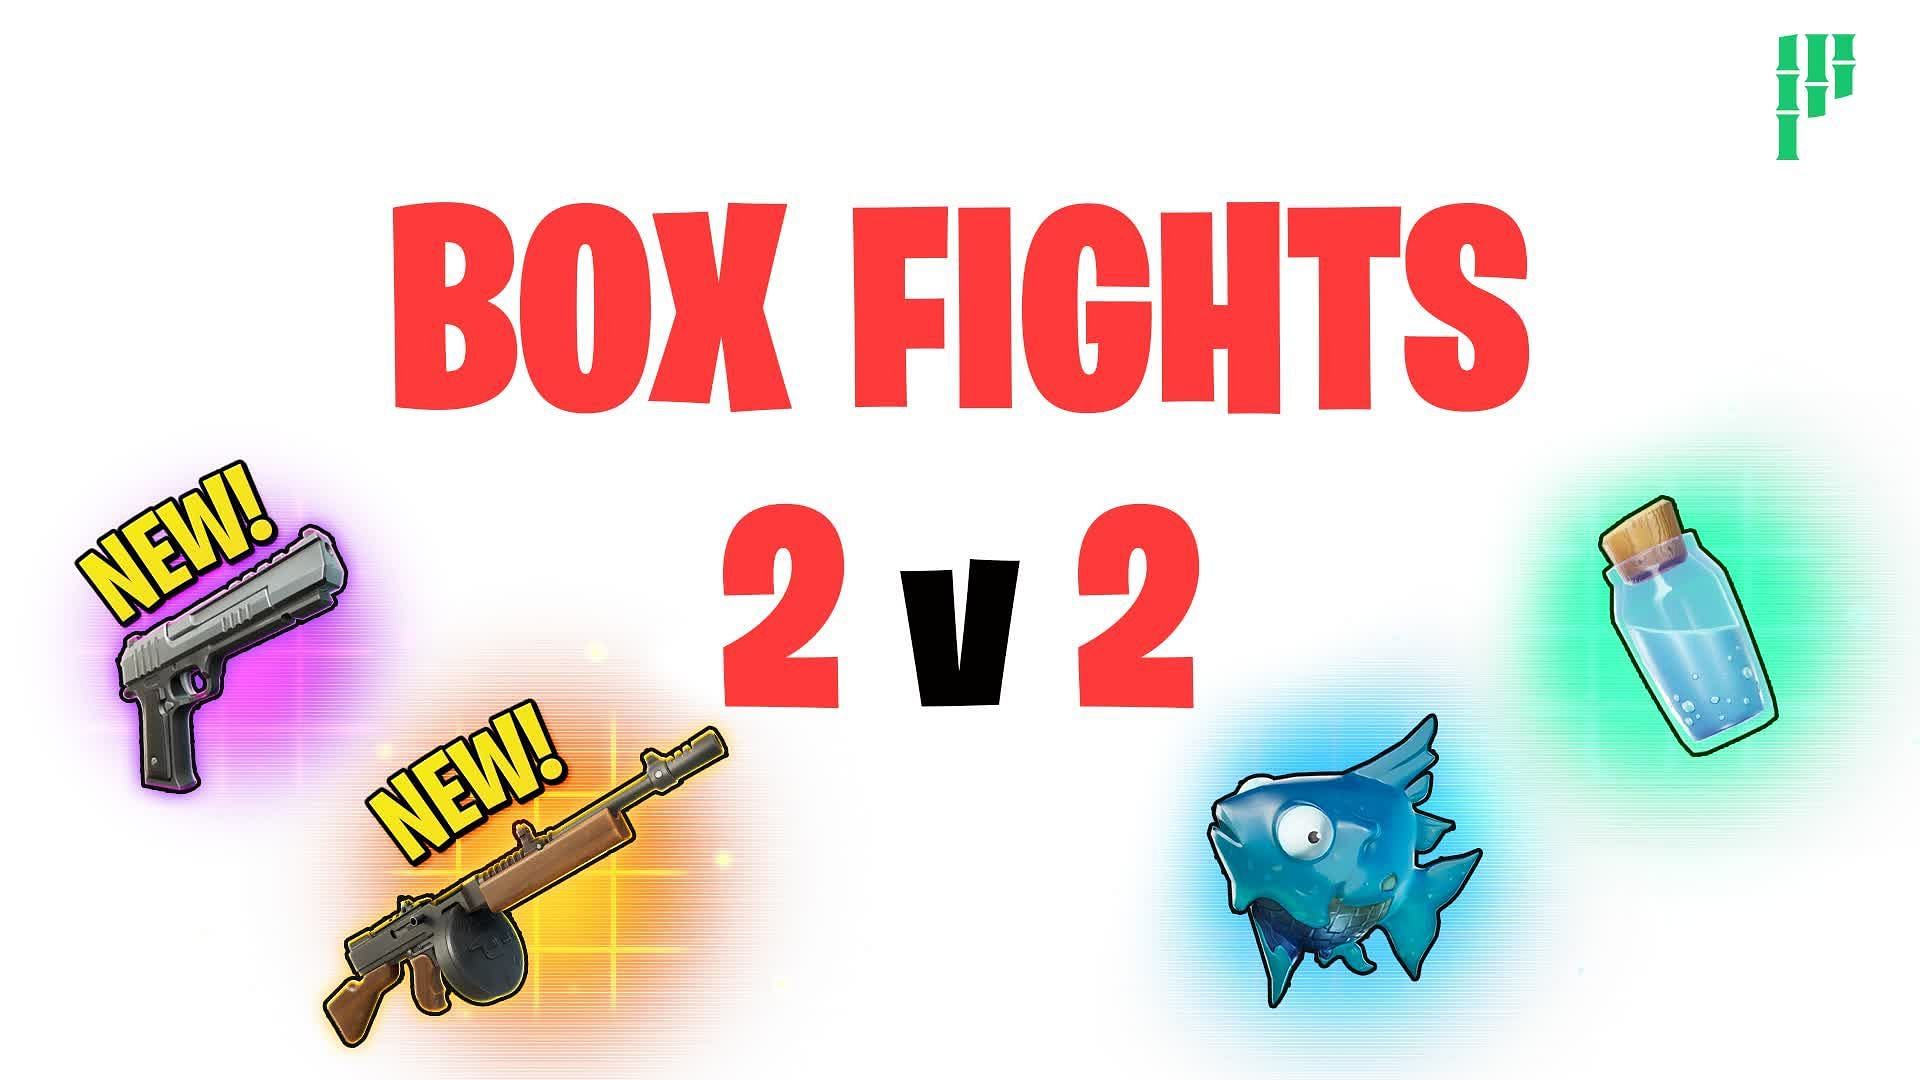 Fortnite PANDVIL Box Fight 2v2: UEFN map code, how to play, and more